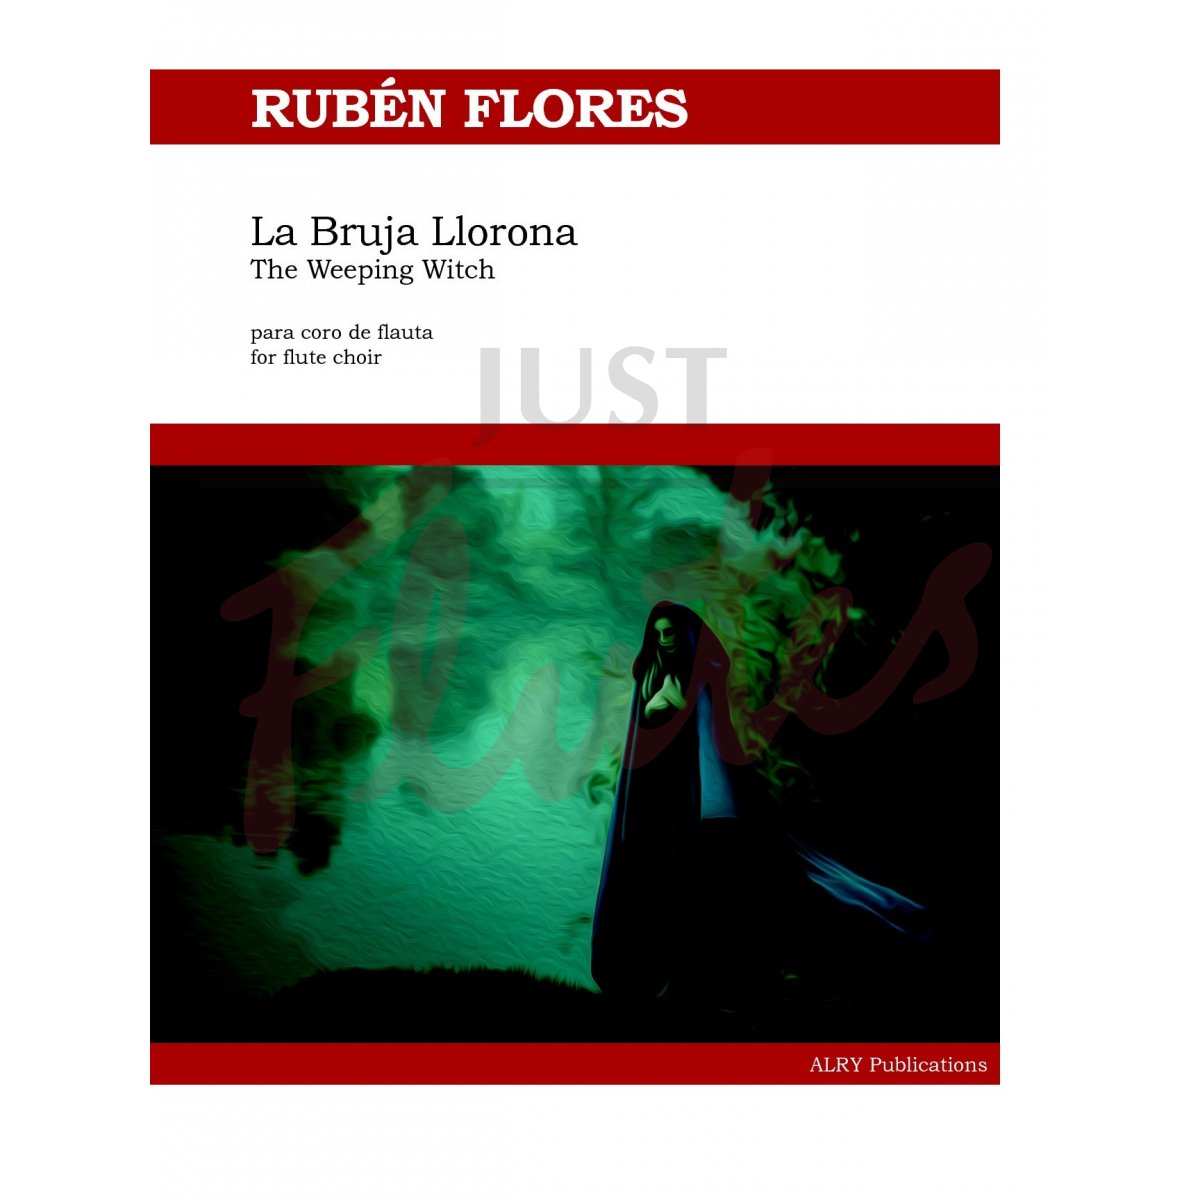 La Bruja Llorona (The Weeping Witch) for Flute Choir